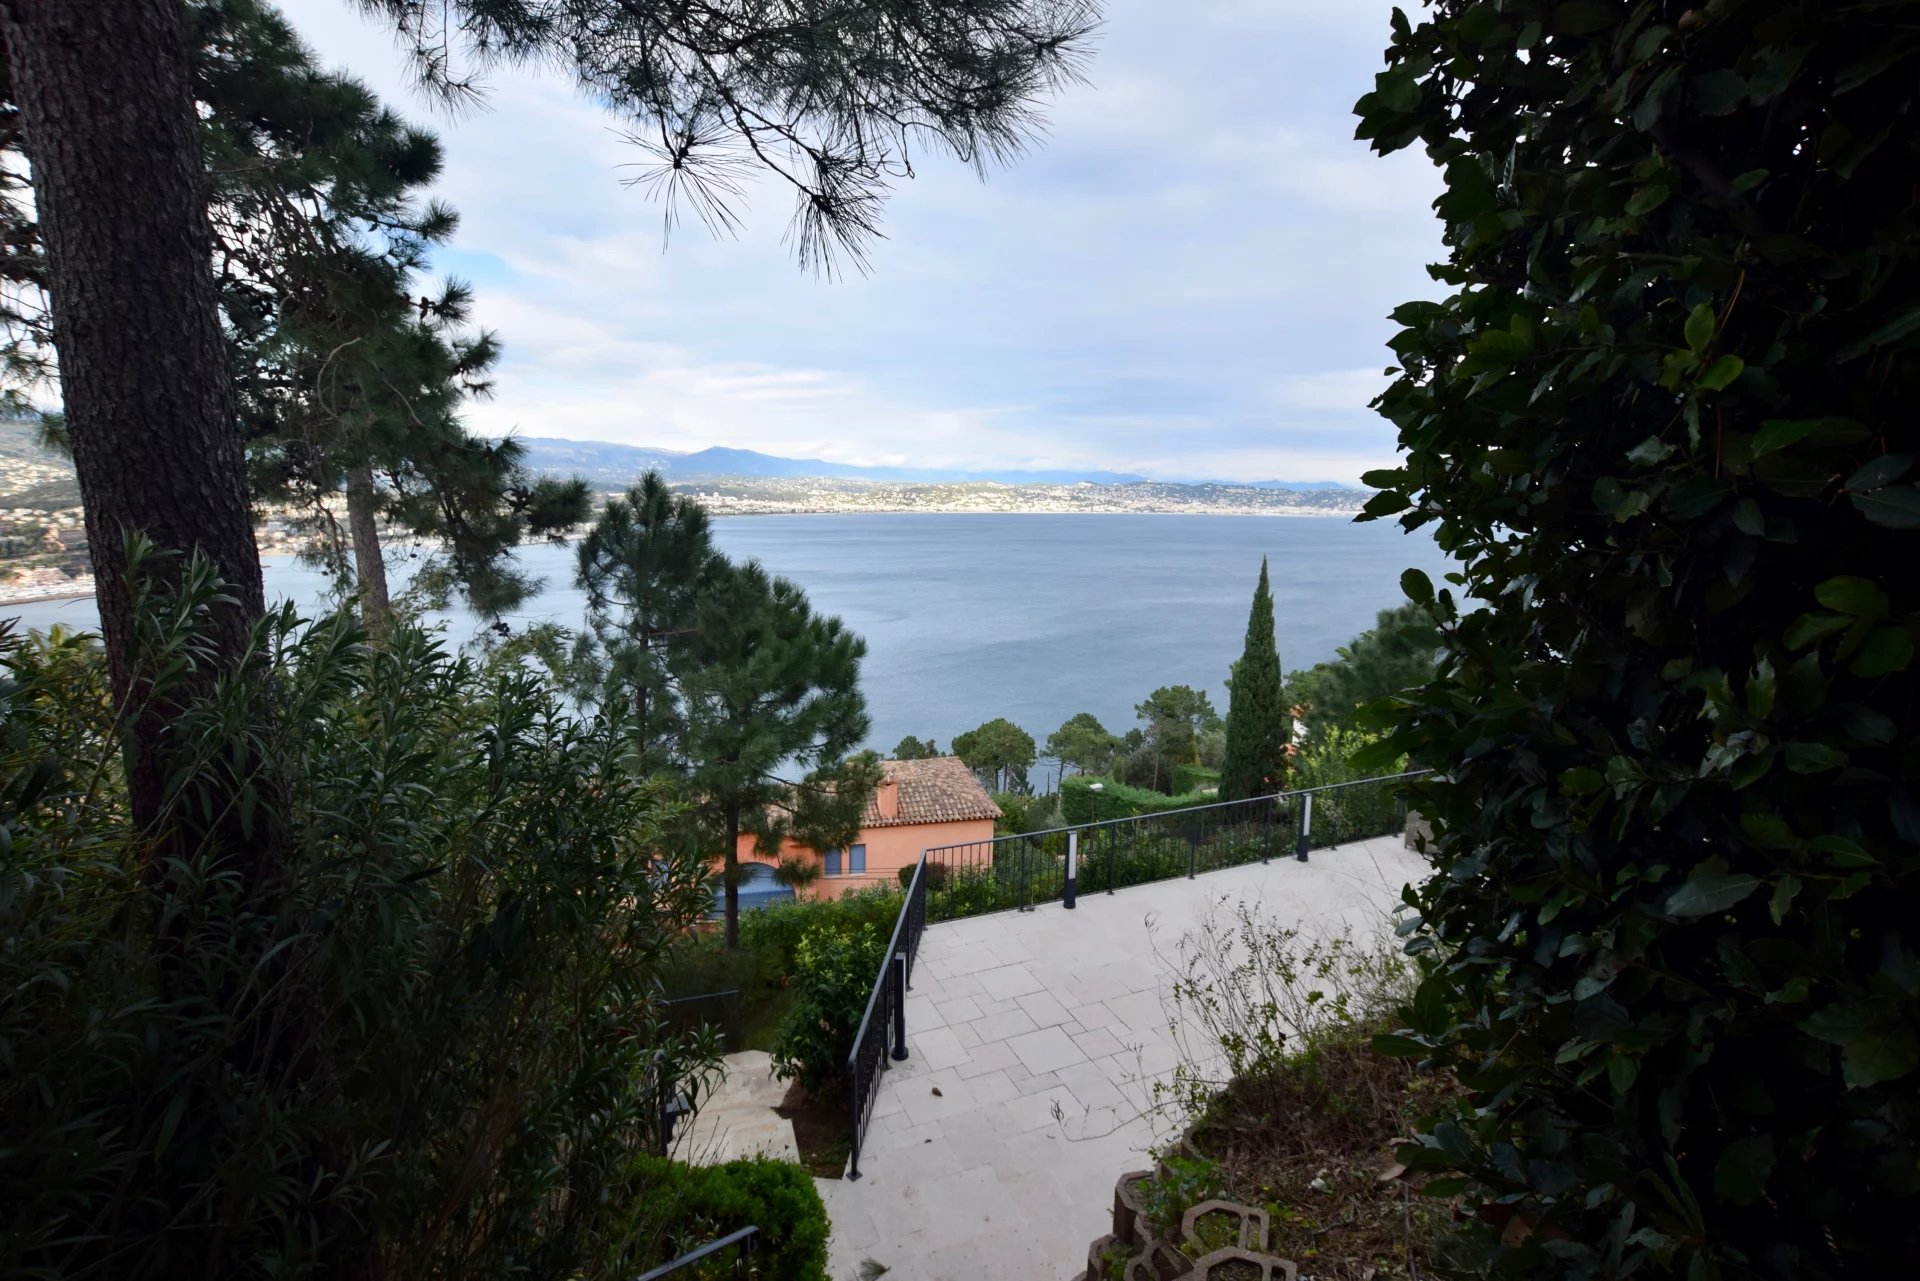 New villa for sale with exceptional panoramic views